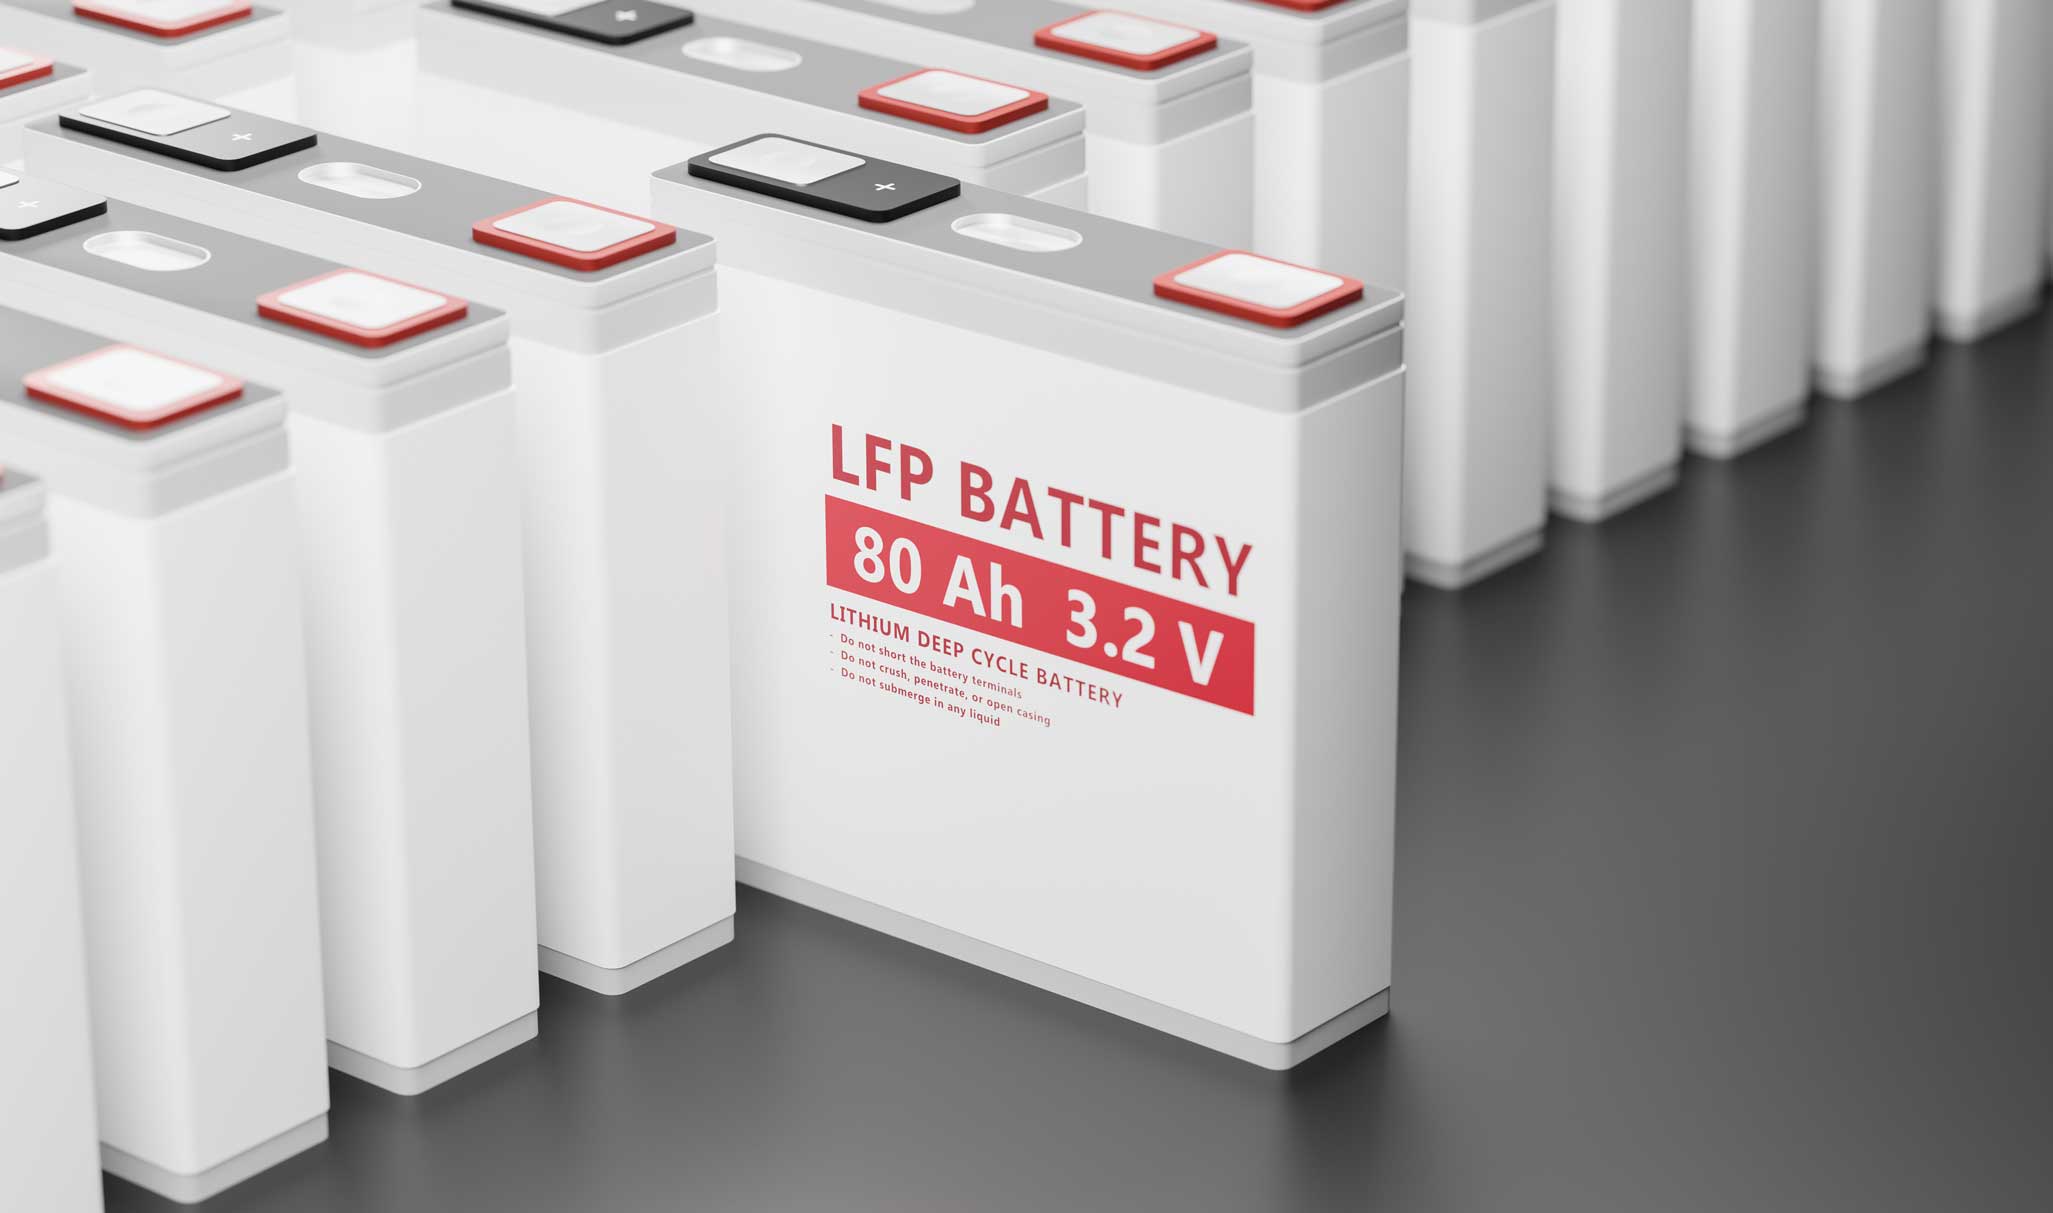 First Phosphate Advances its Lac à l’Orignal Property as a Unique Source for the Lithium Iron Phosphate (LFP) Battery Industry